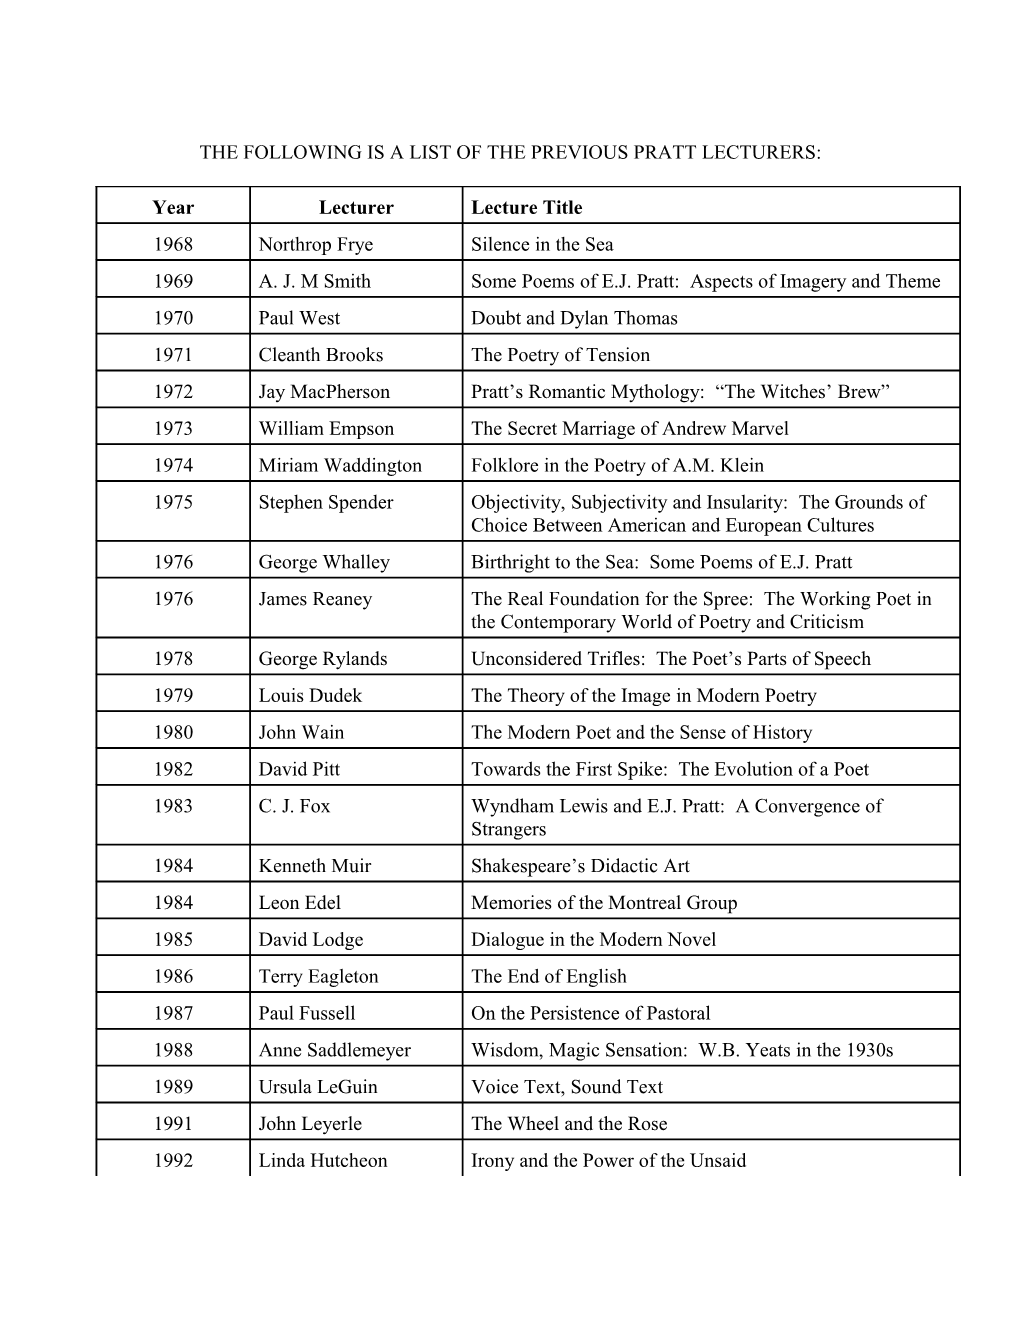 The Following Is a List of the Previous Pratt Lecturers